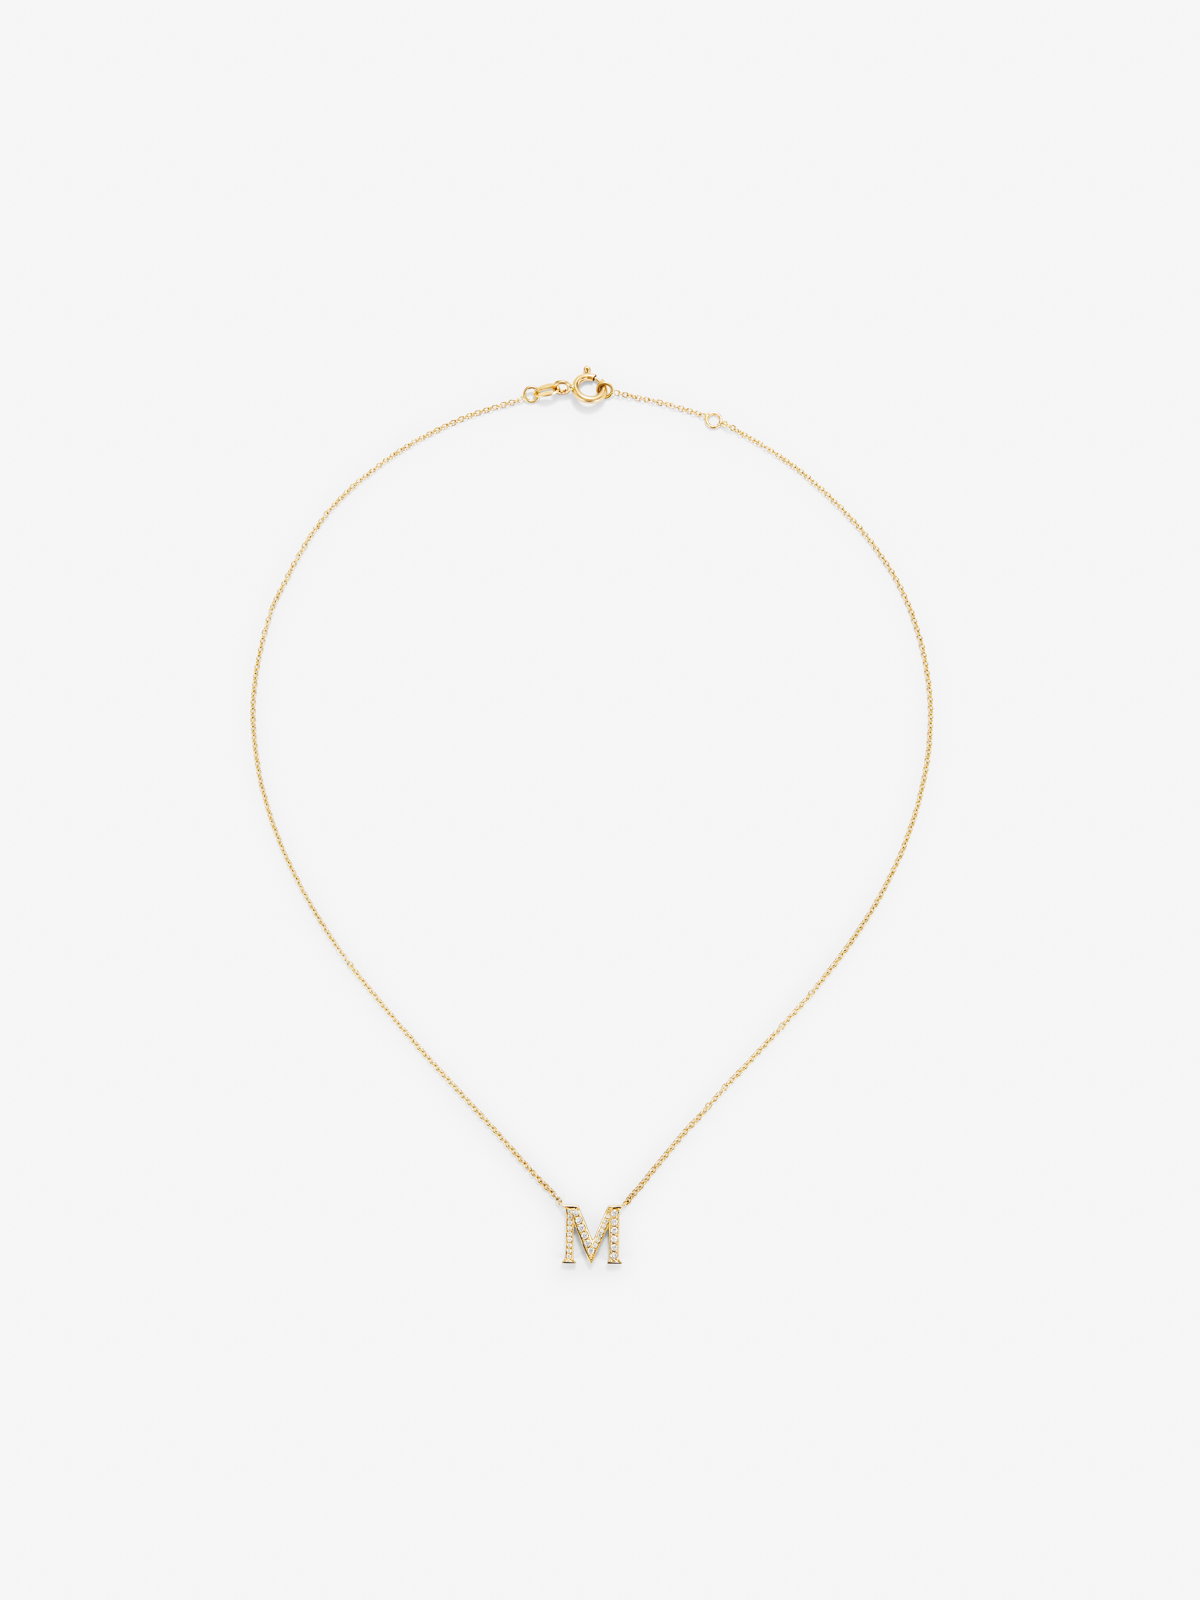 18K yellow gold pendant with m